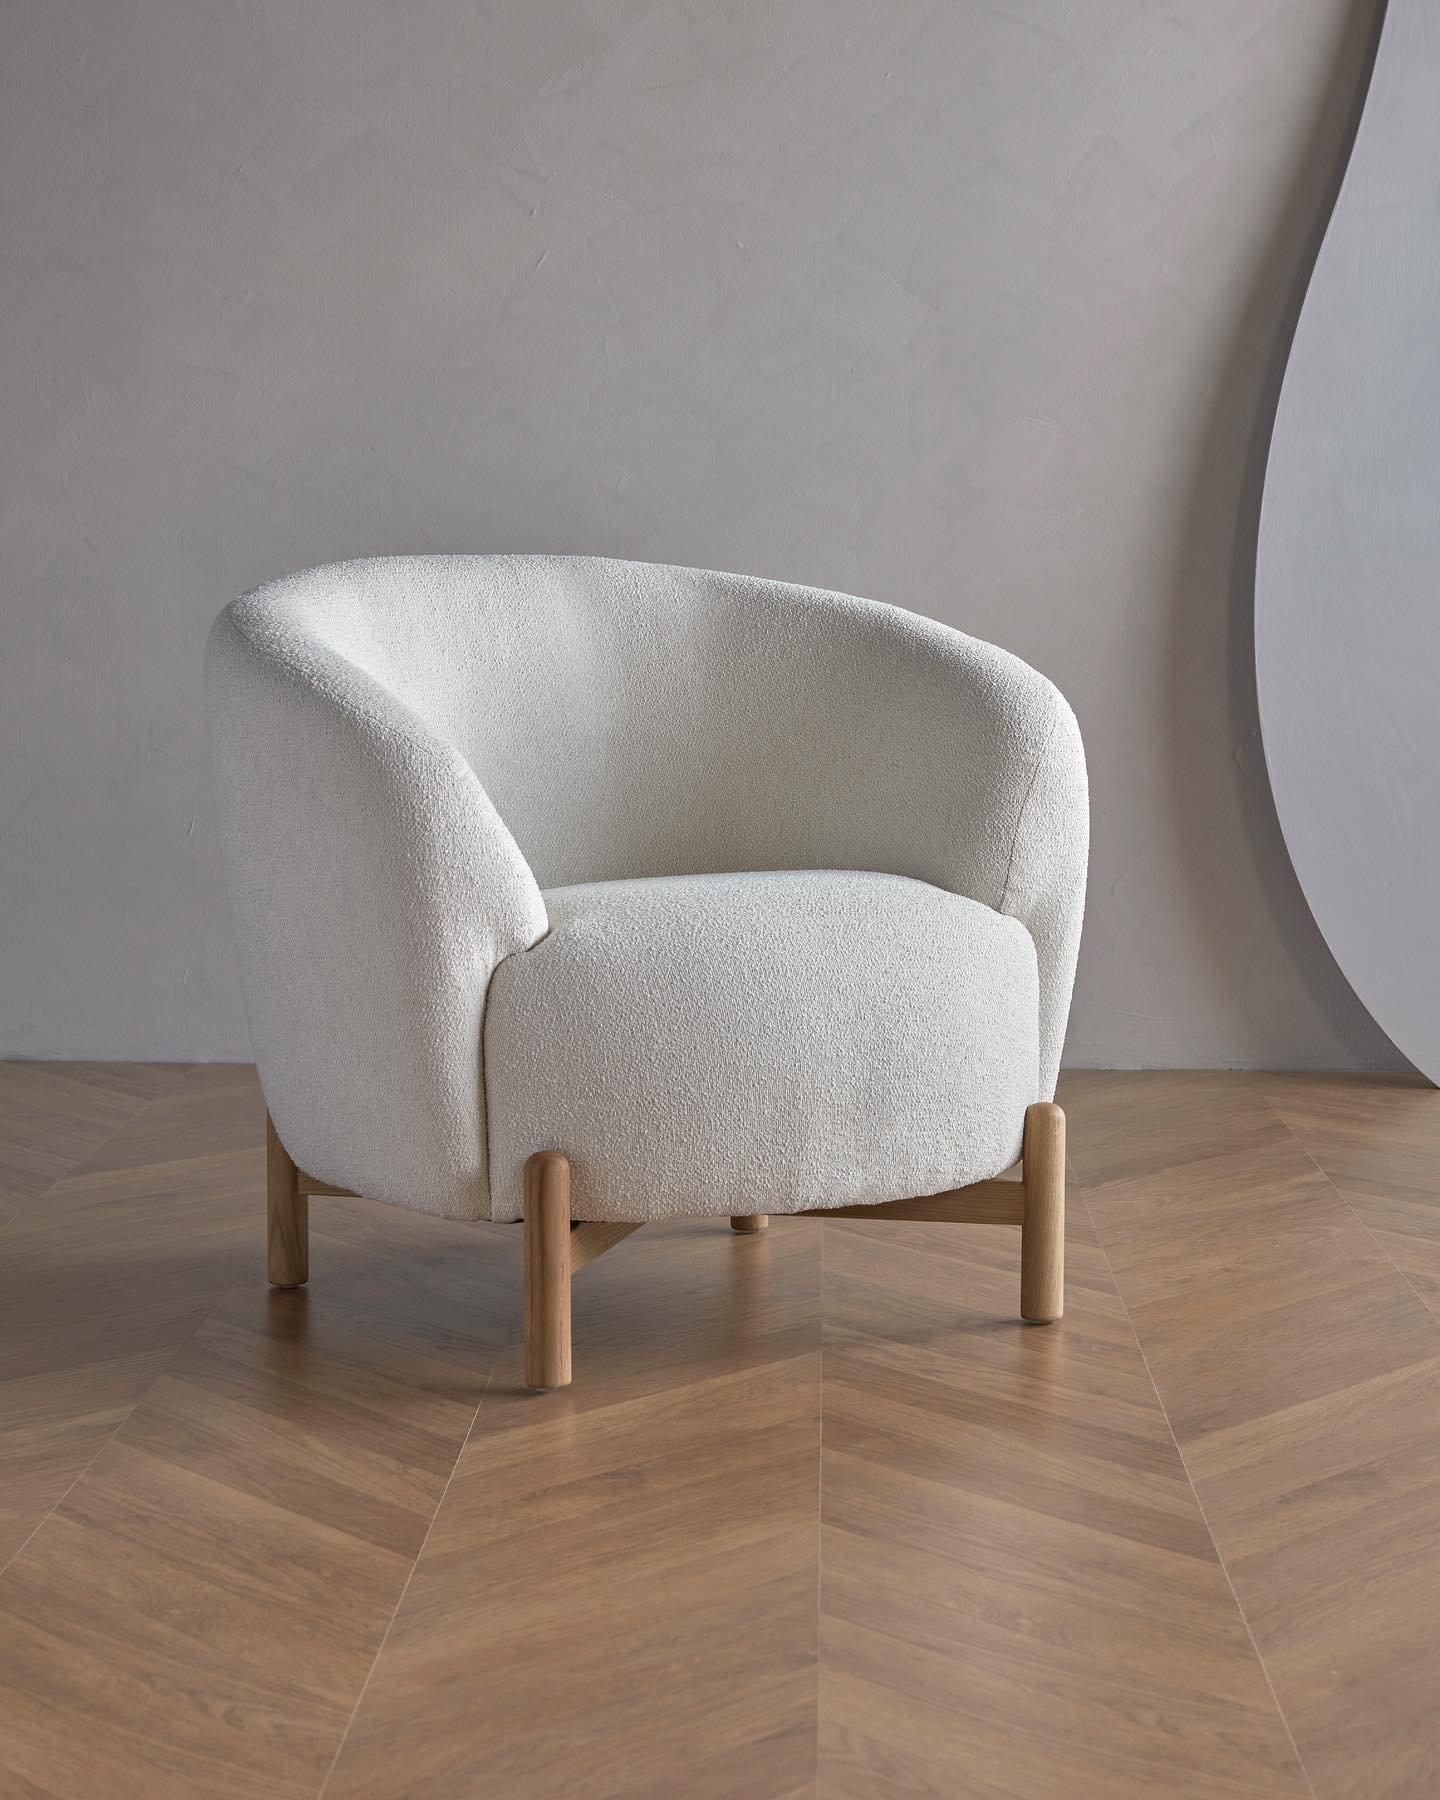 Gran Lounge Chair with solid oak legs. The idea behind Gran was to create a comfortable lounge chair with character, presence &amp; personality.
.
.
Designed by @oliverlukasweisskrogh 
.
.
#weisskrogh #nordiskehjem #mittnordiskehjem #boligindretning 